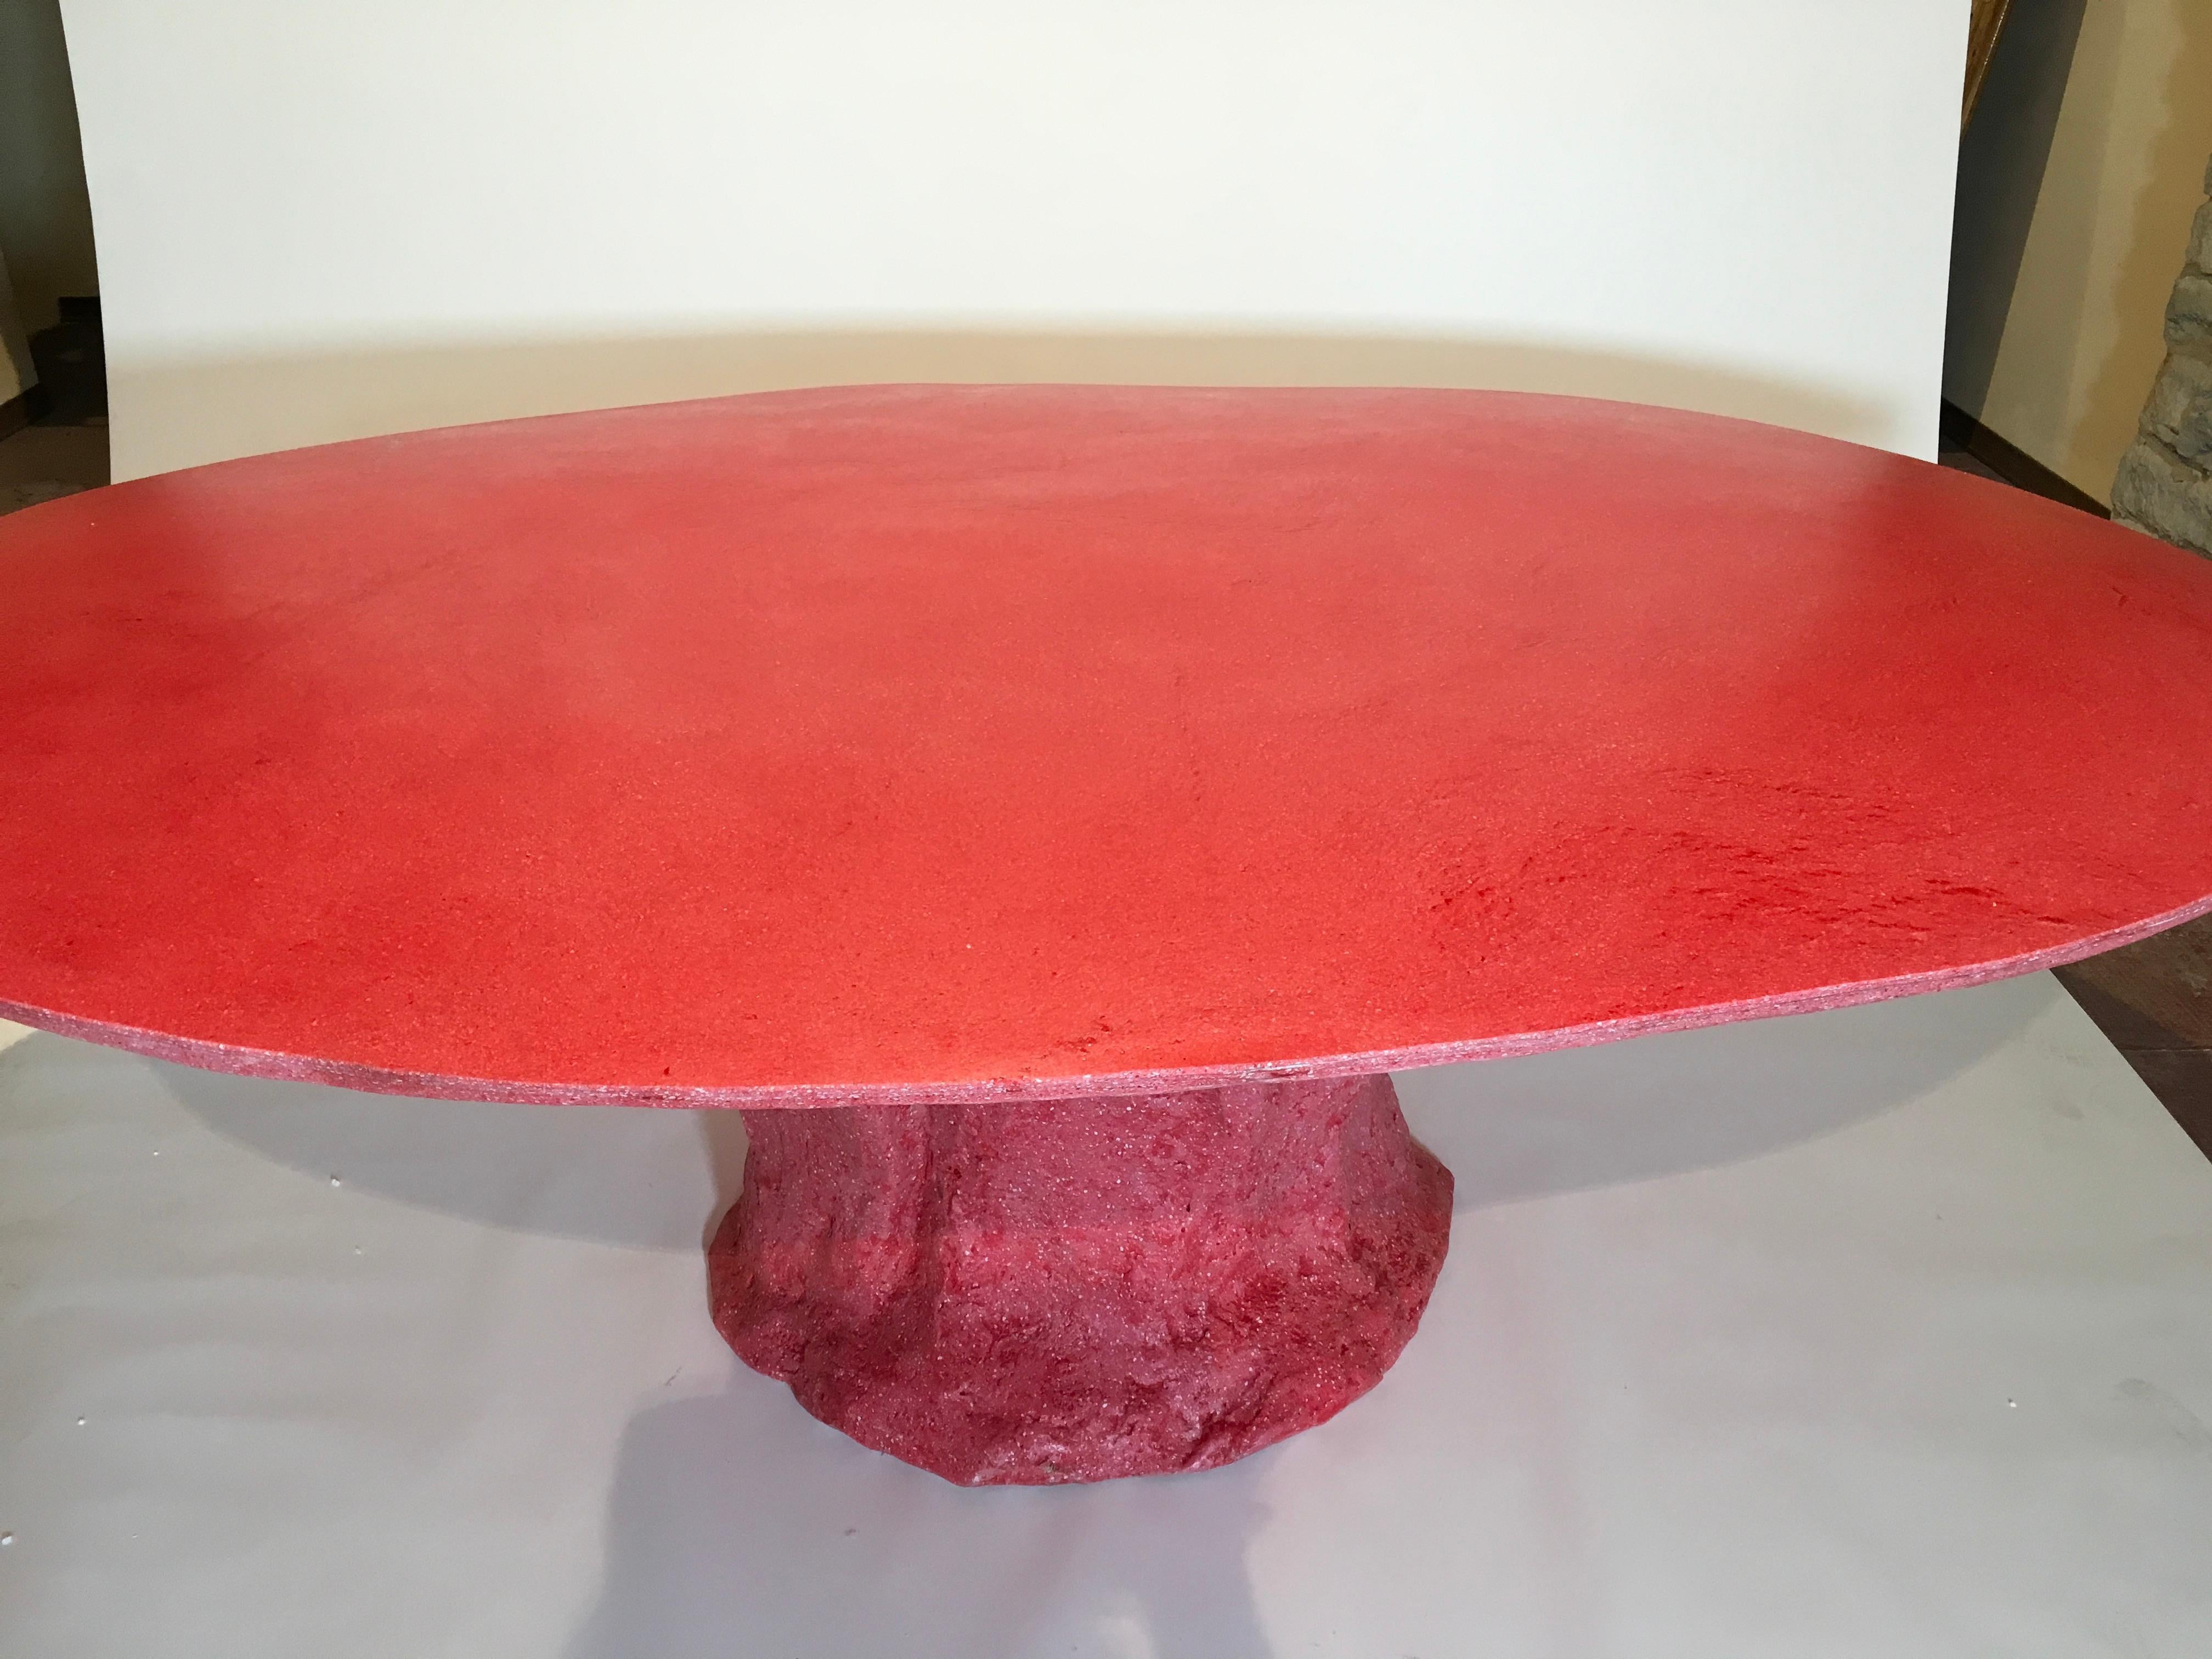 Beautiful table made of Glebanite (fiberglass) and red pigment. Handmade single piece. The base is made thanks to a sand mold that is lost after its realization.
Designed and produced by Giovanni Minelli.

Biography:
Giovanni Minelli was born in